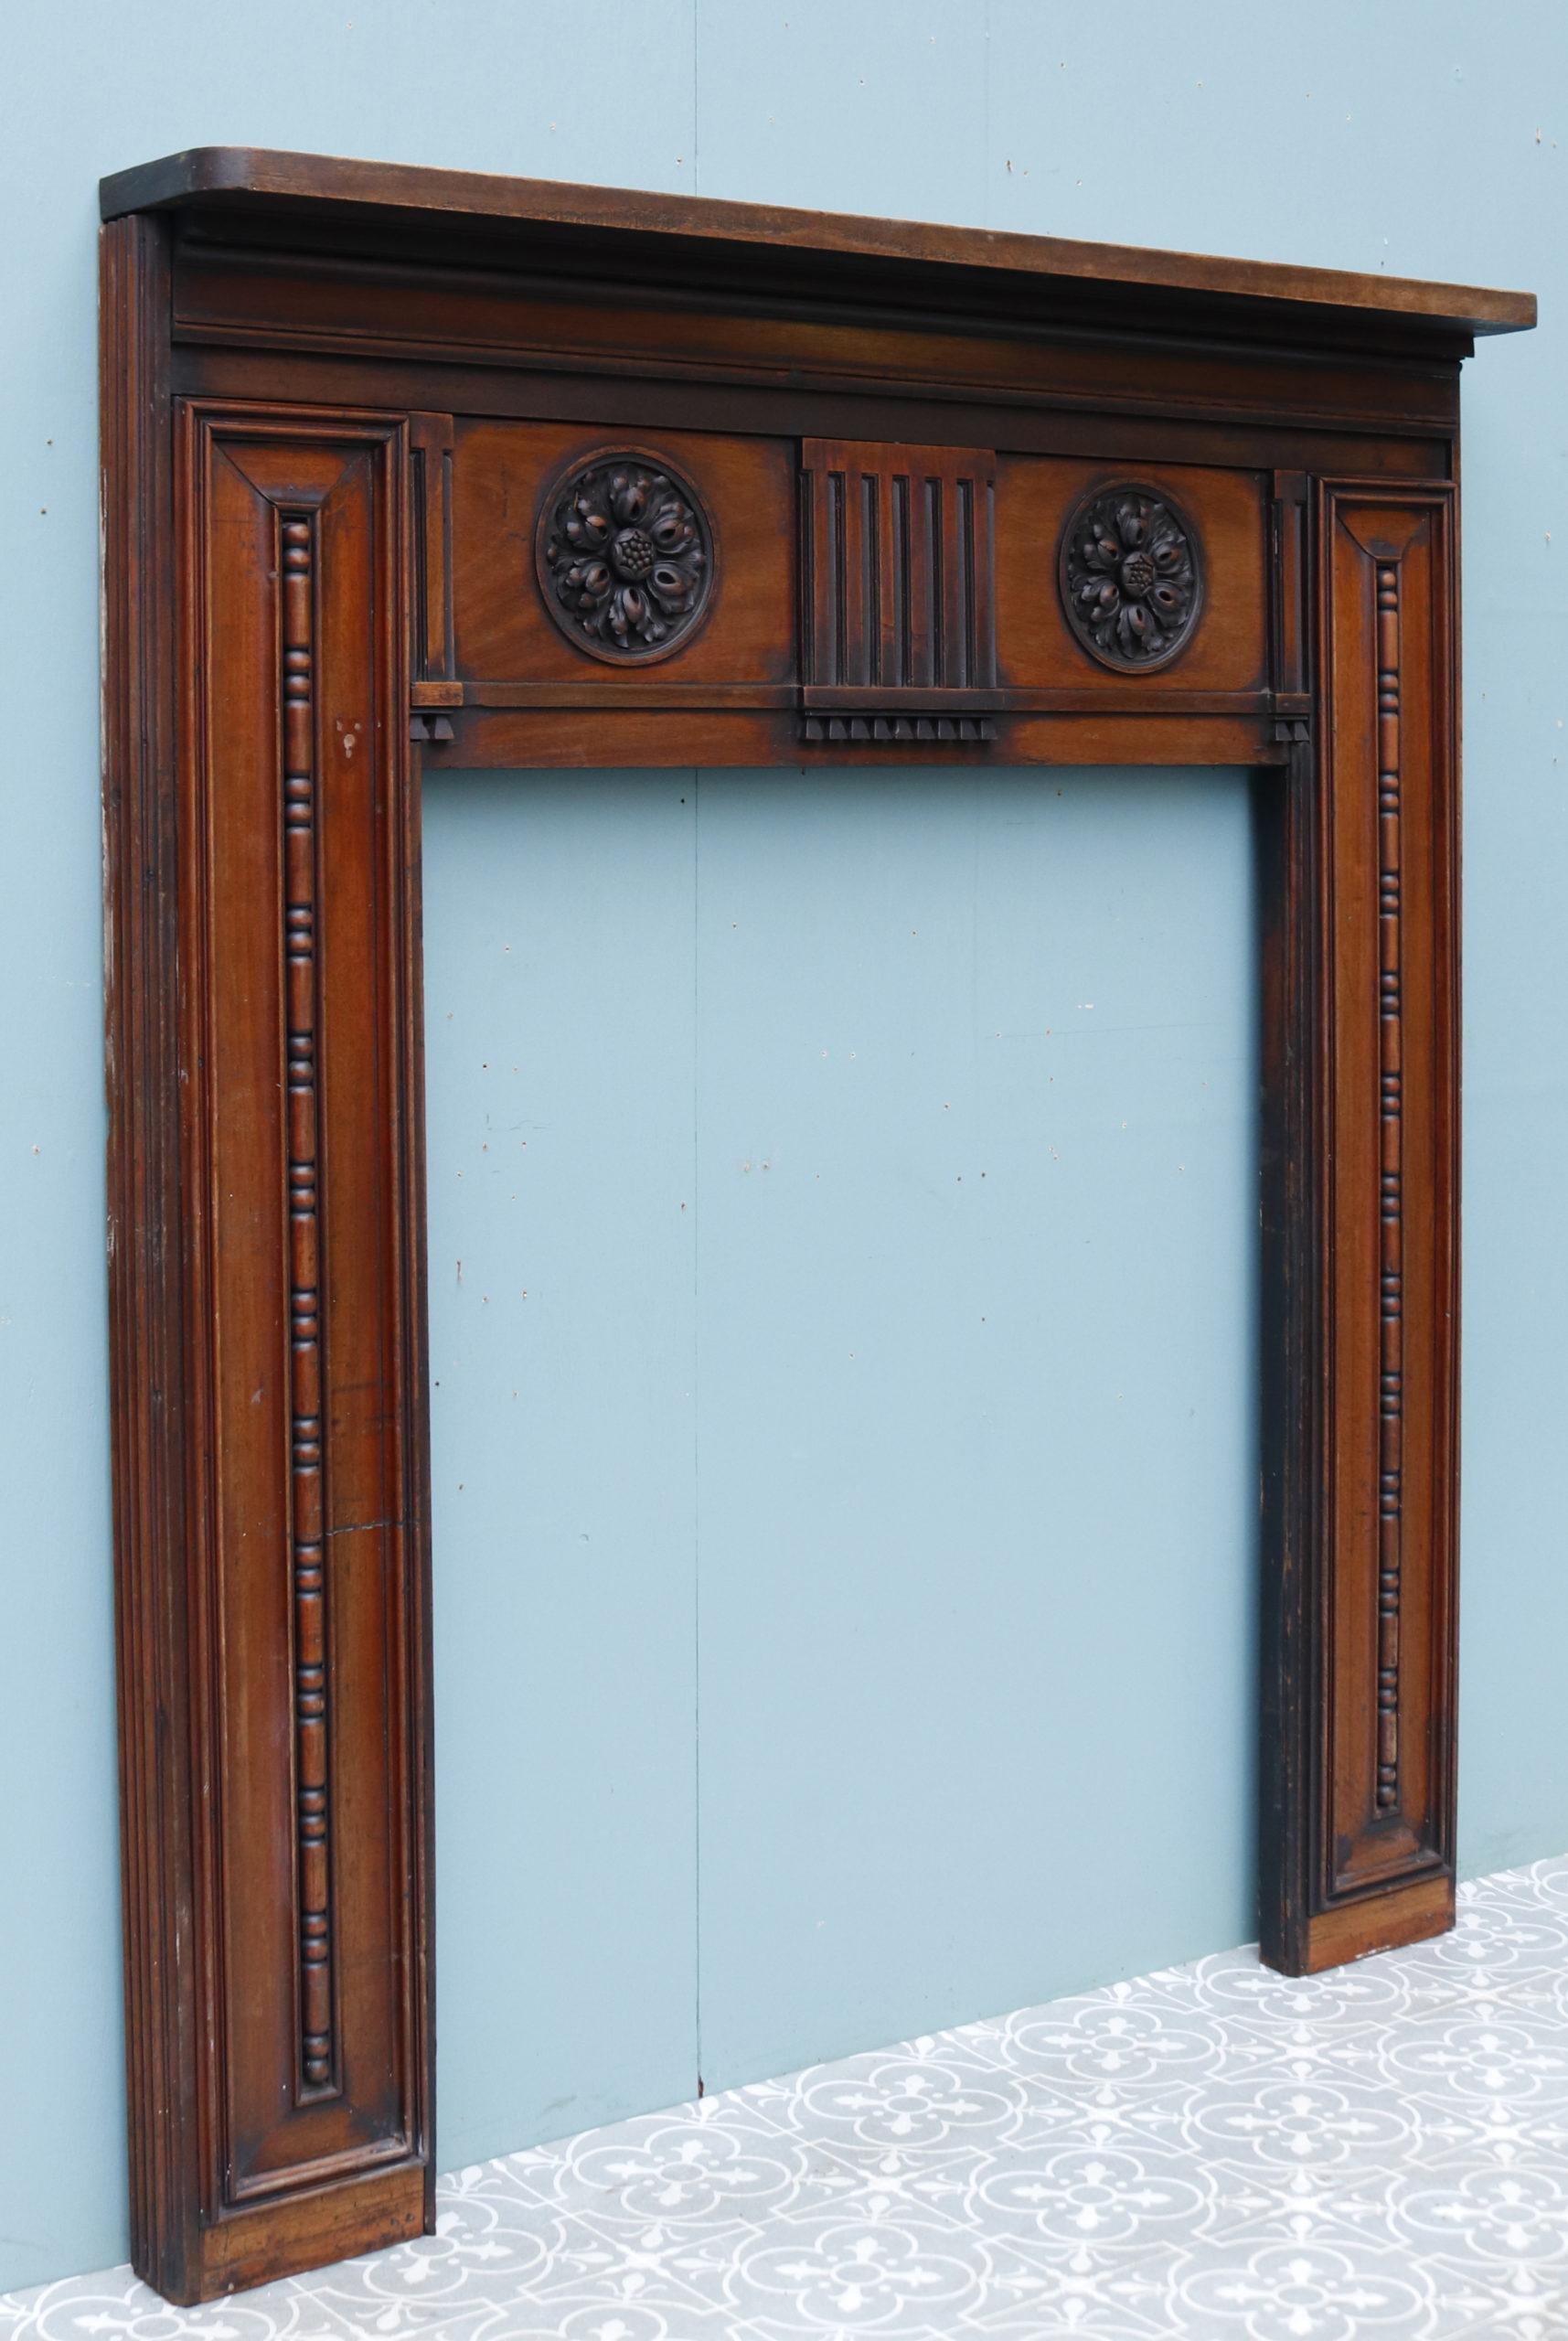 A reclaimed early 19th century Georgian style carved Mahogany fireplace.

Additional Dimensions:

Opening Height 97 cm

Opening Width 97 cm

Width between outsides of the foot blocks 119.5 cm.